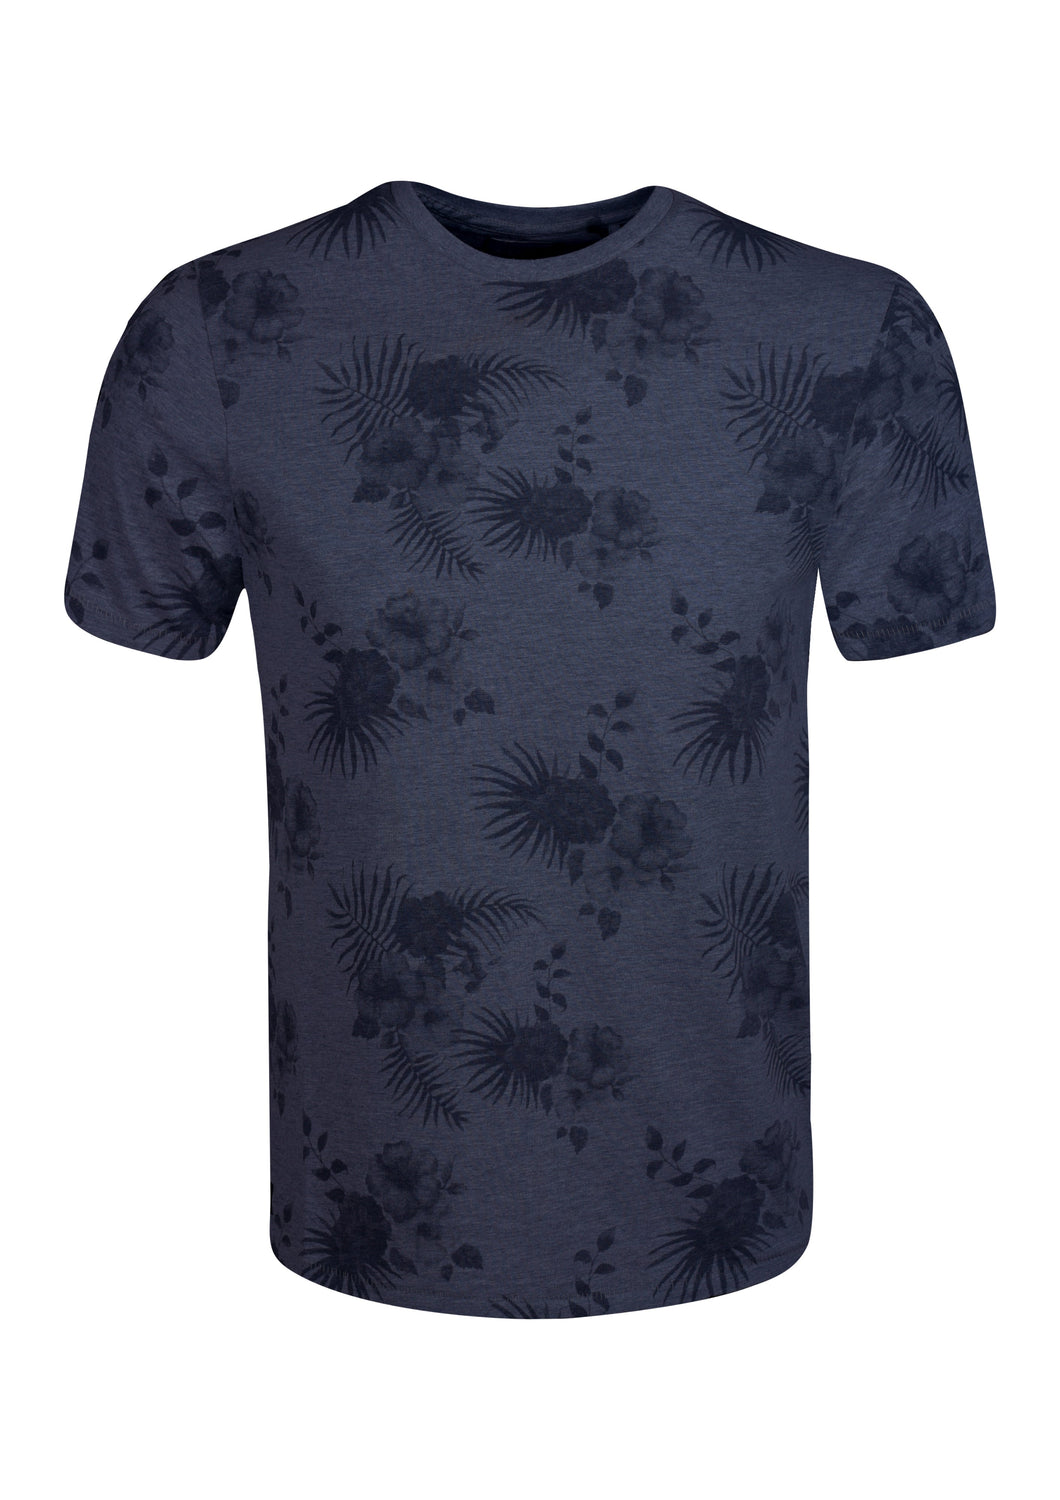 CREW NECK T SHIRT WITH FLOWERS PRINT - NAVY